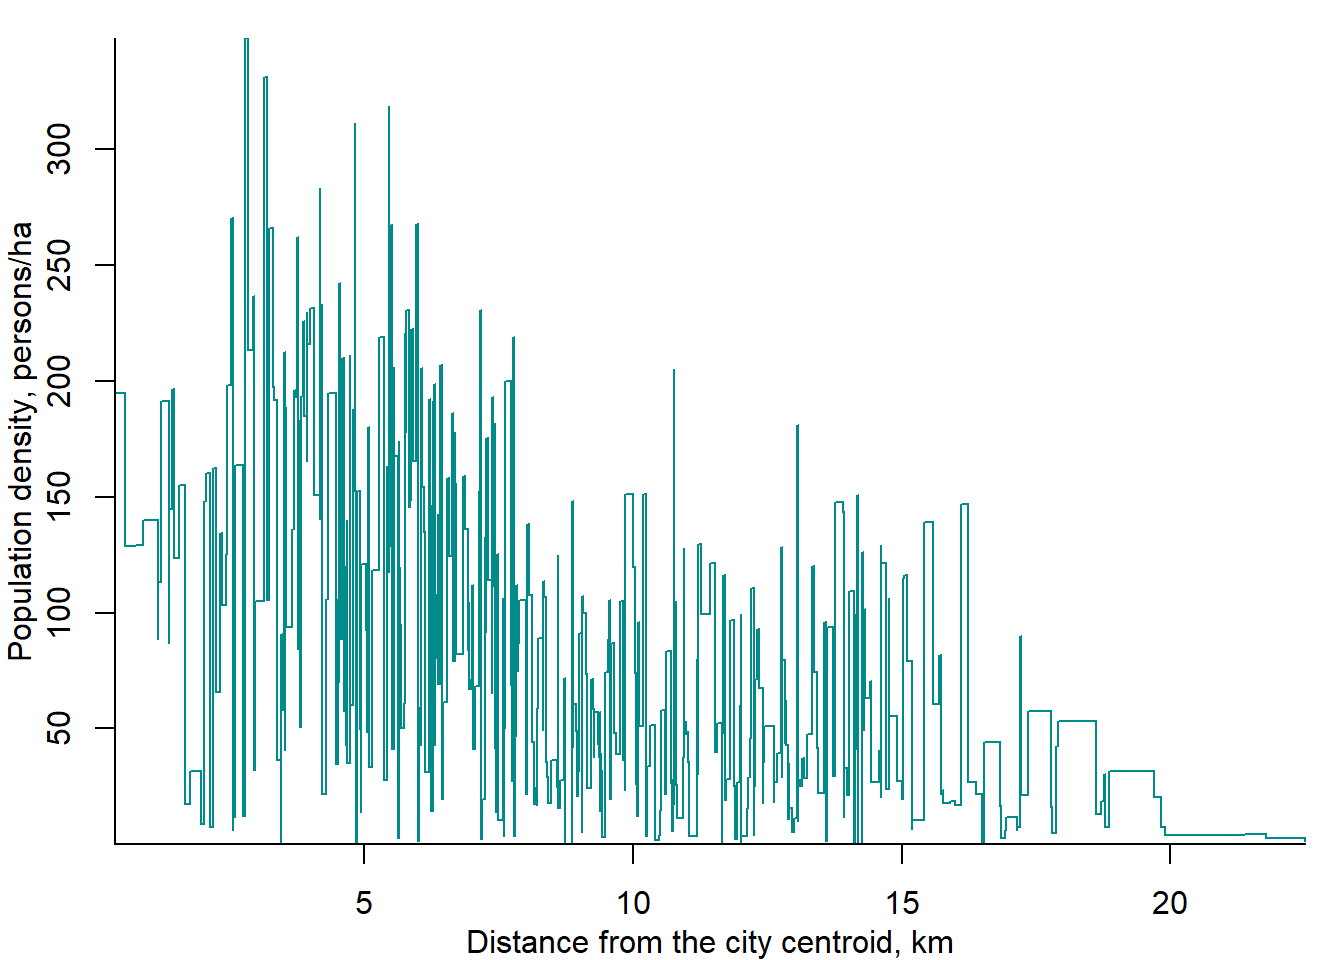 Distribution of population density by distance from the centroid in Berlin, 2015